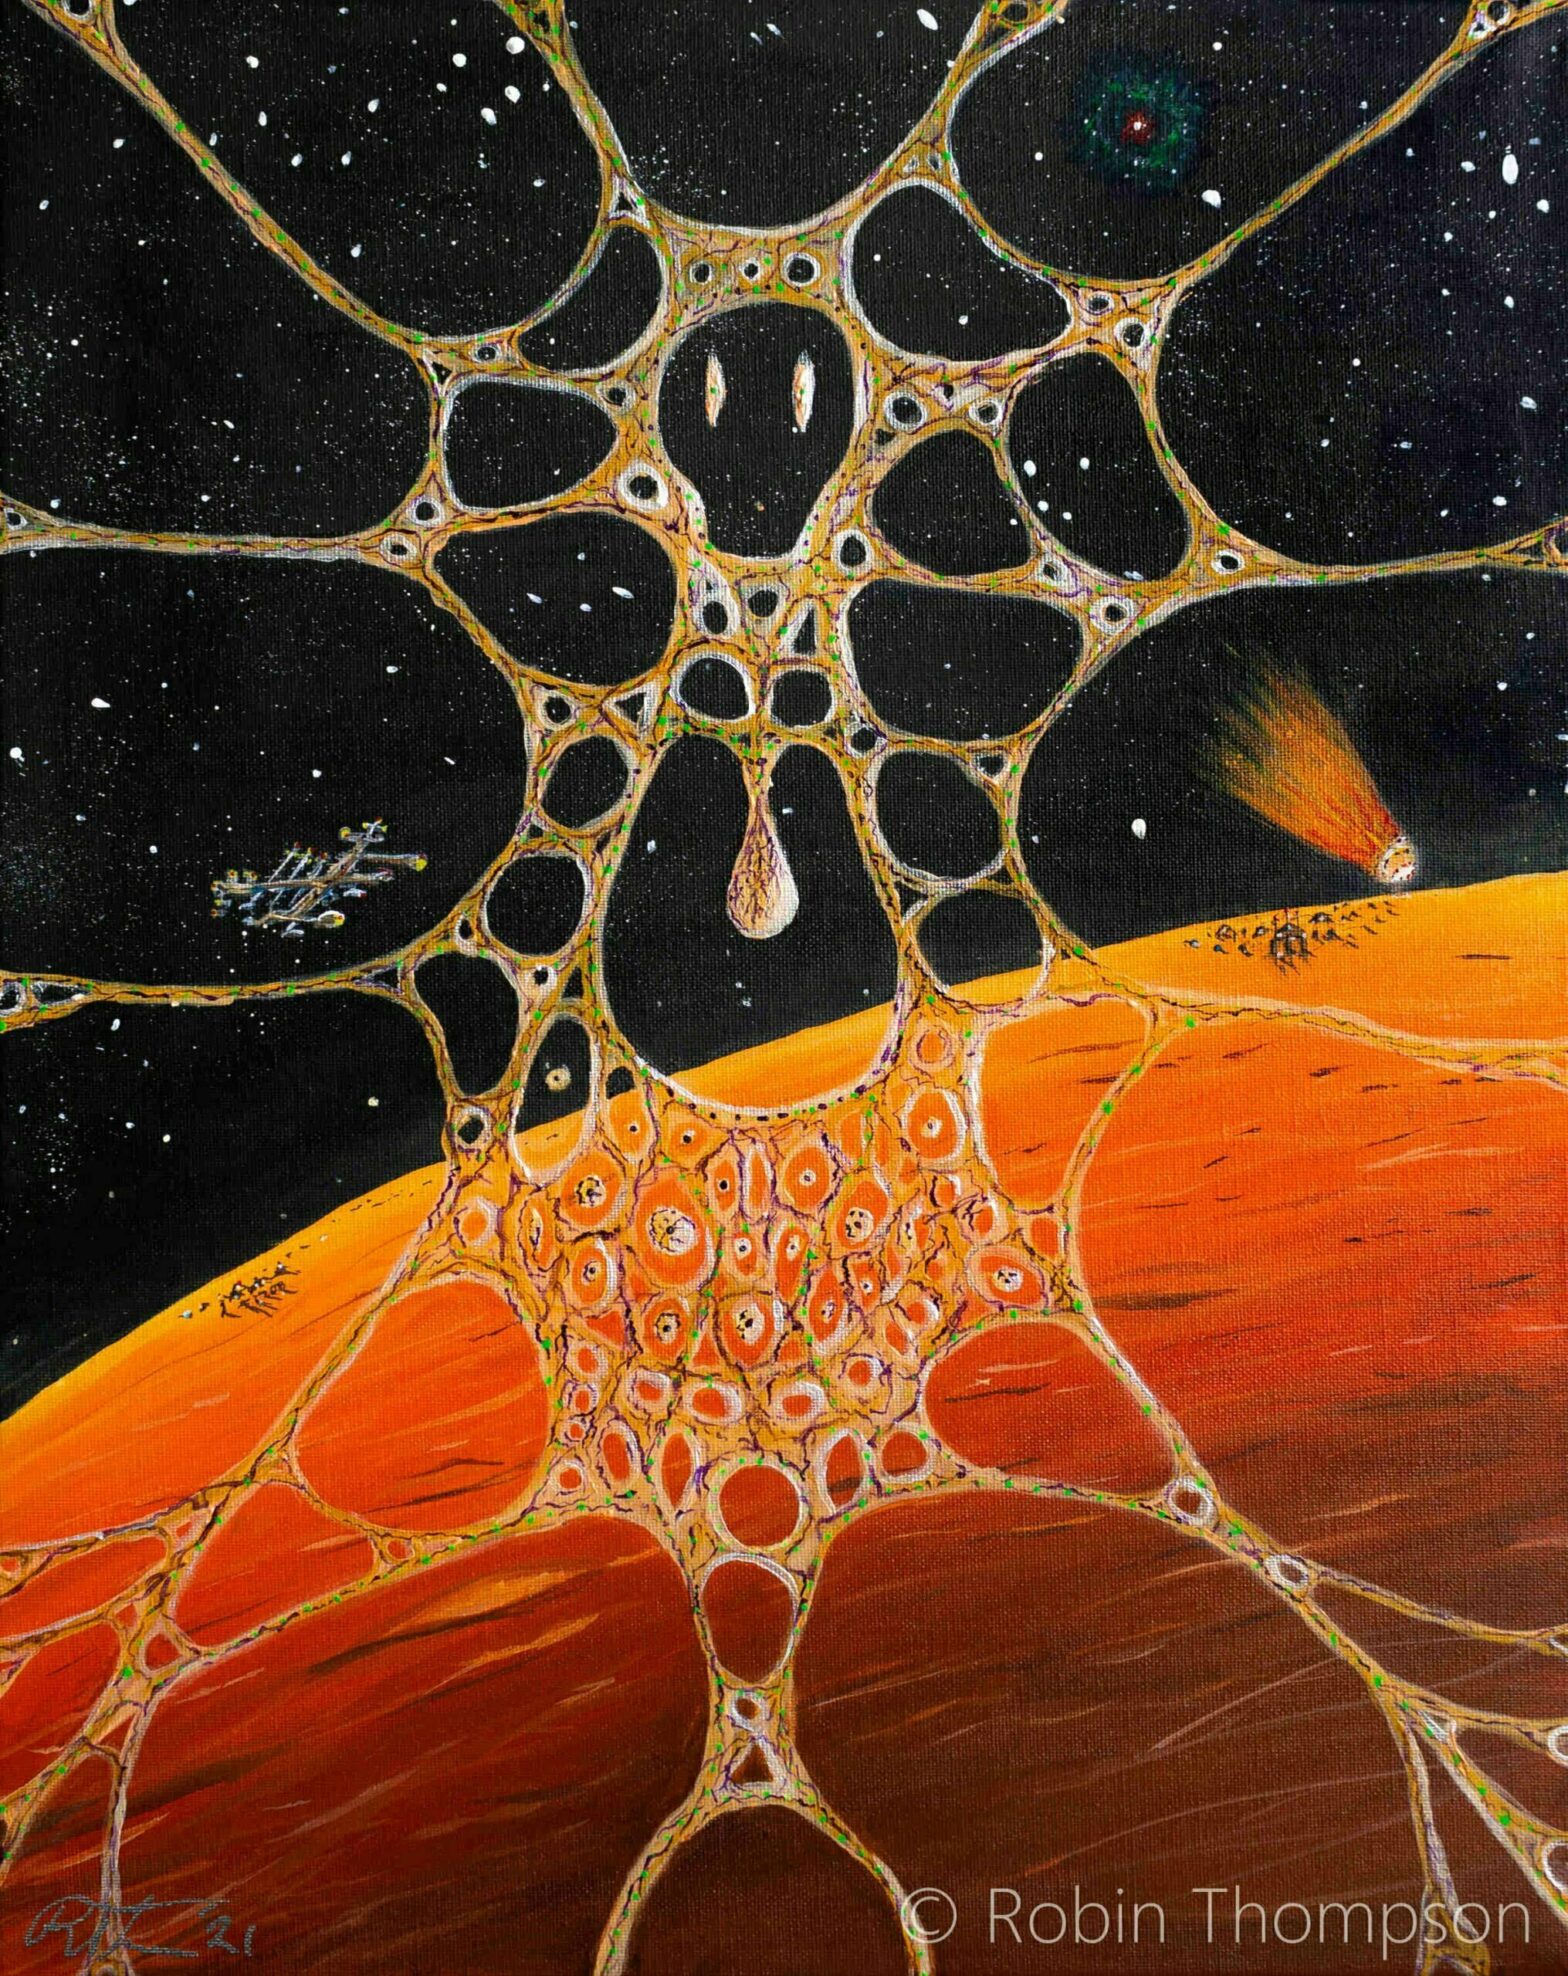 Acrylic painting showing a space scene of a large red planet, deep black stars in the background, and in the foreground a mysterious, alien-like figure with neuronal looking limbs. The figure appears to have a deep knowledge of the universe in which the painting is shown.